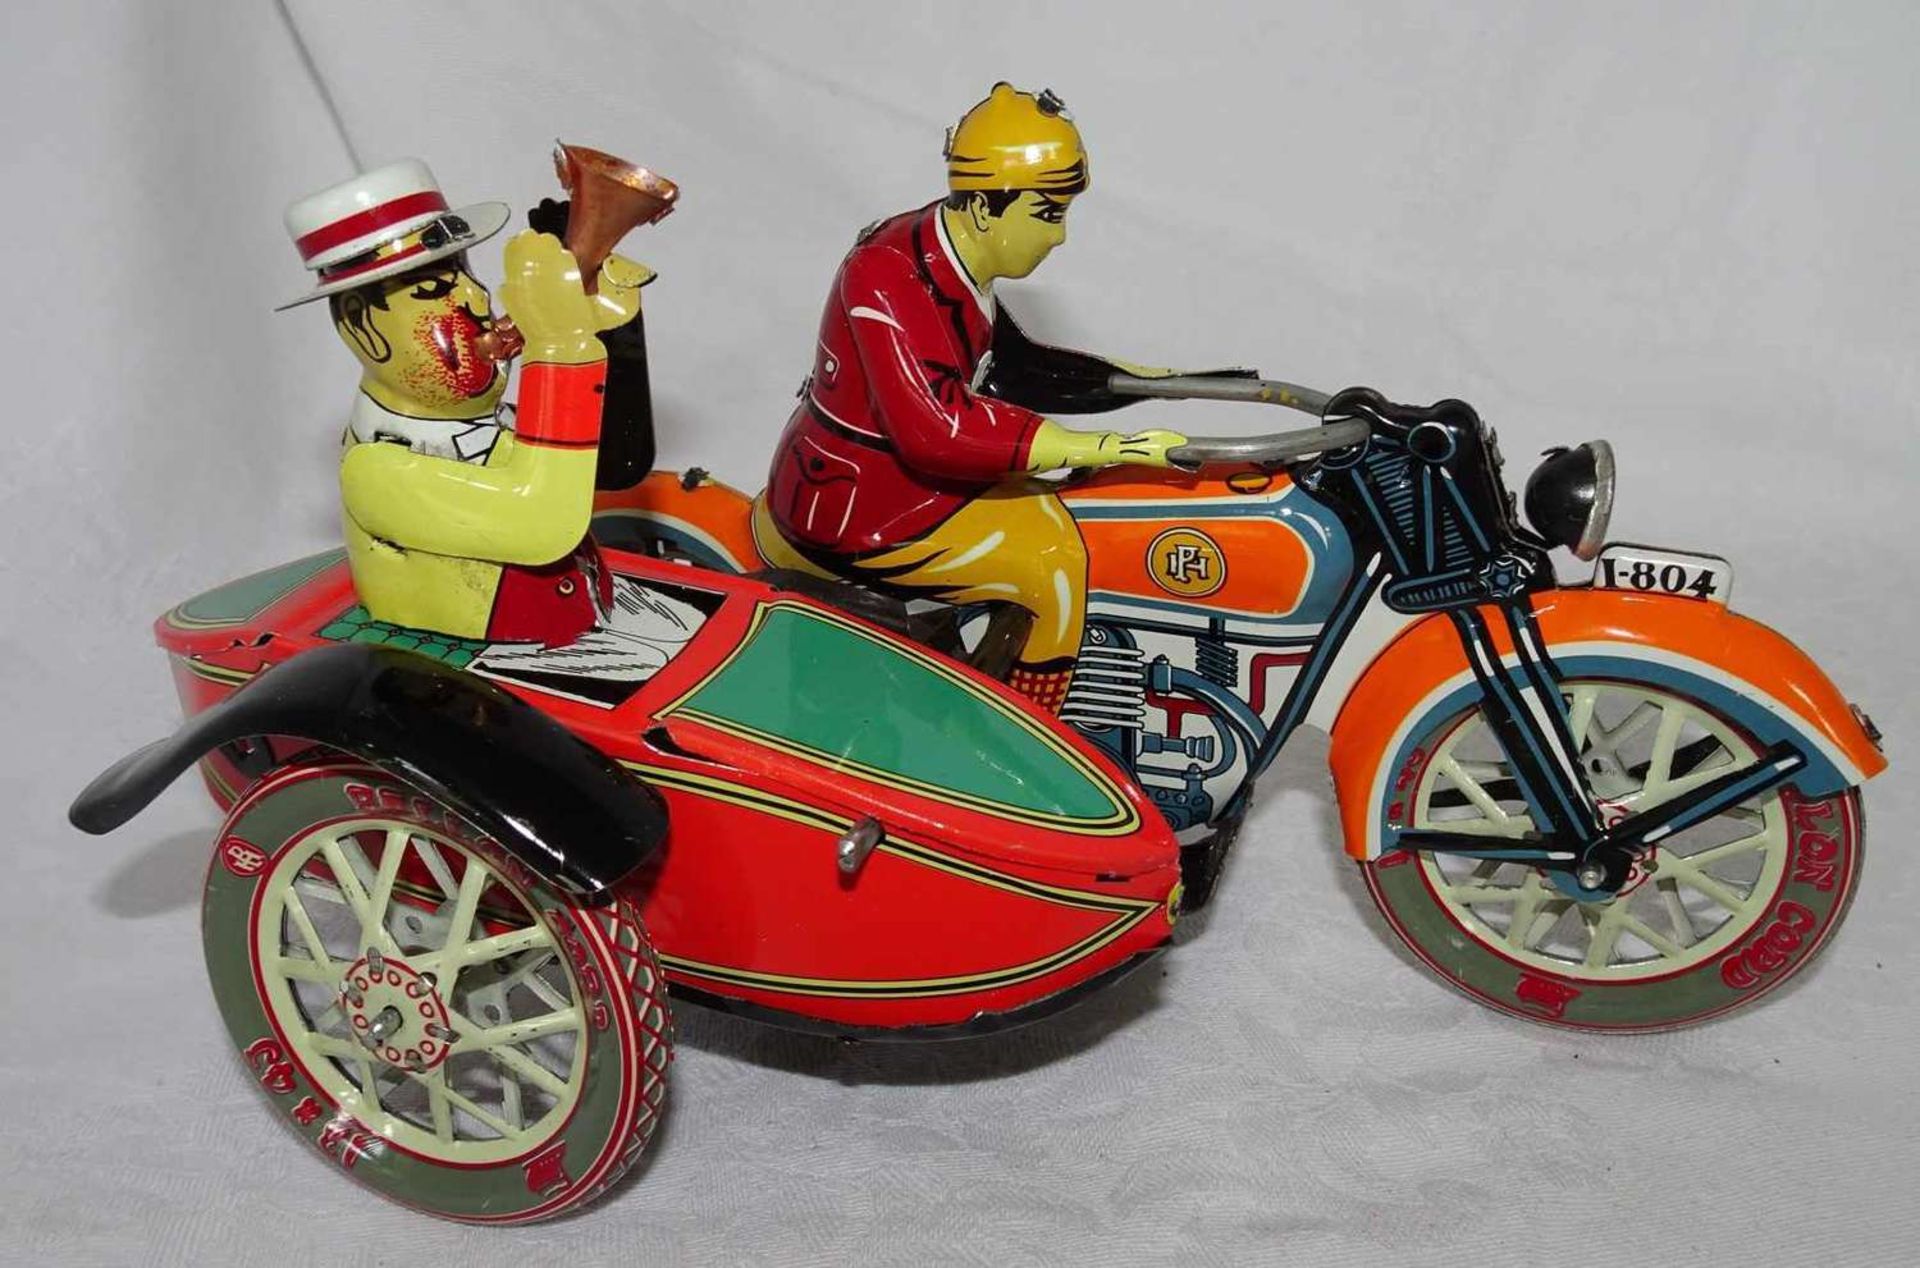 Tin toys - motorcycle with sidecar. With key winding - key available. Retro.Blechspielzeug - - Bild 2 aus 2